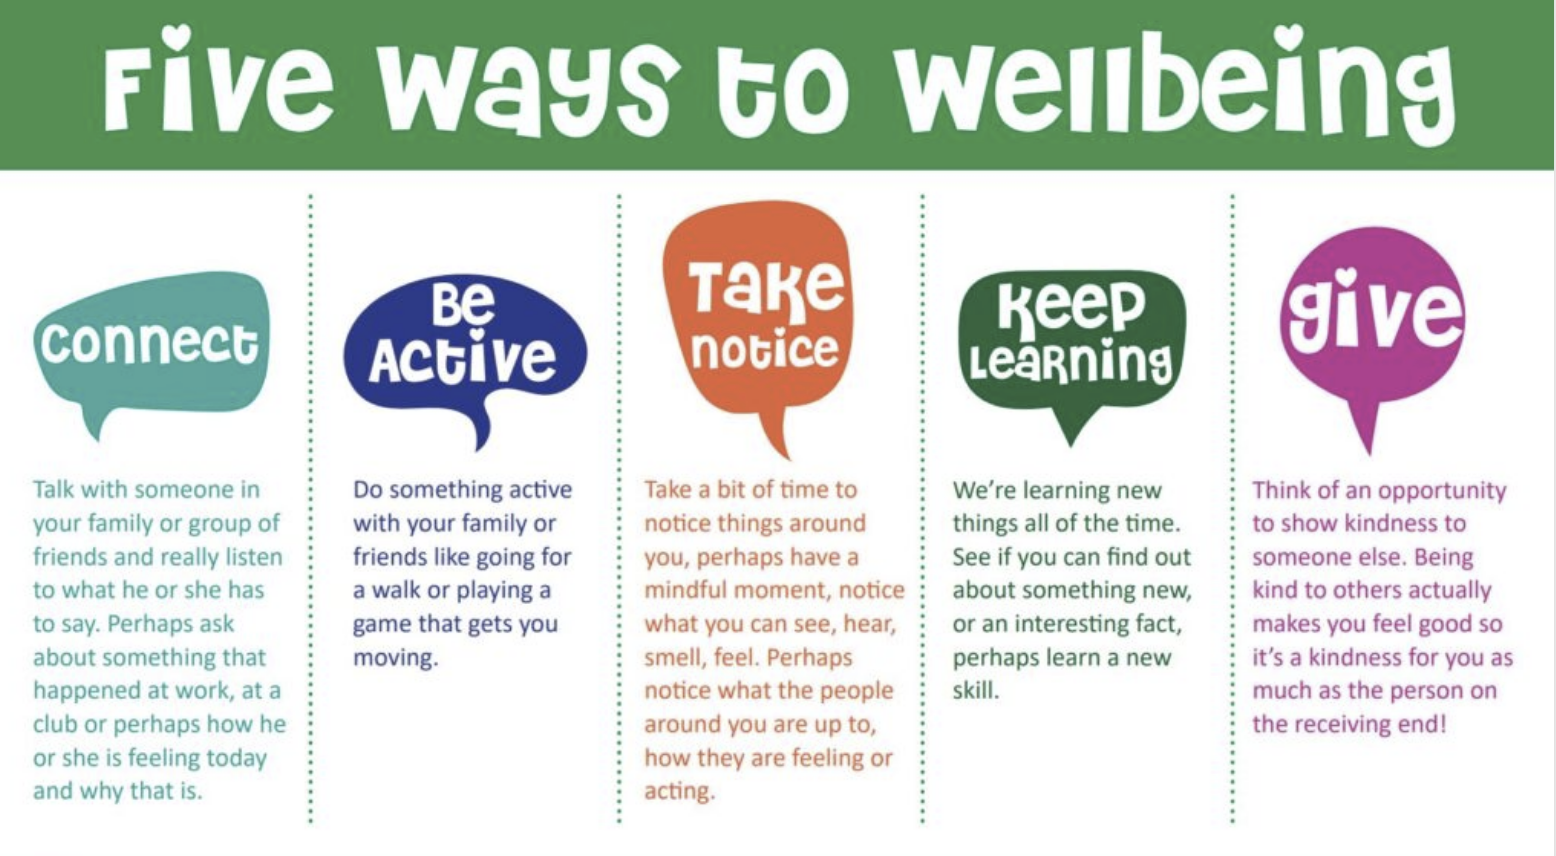 Steps to Wellbeing